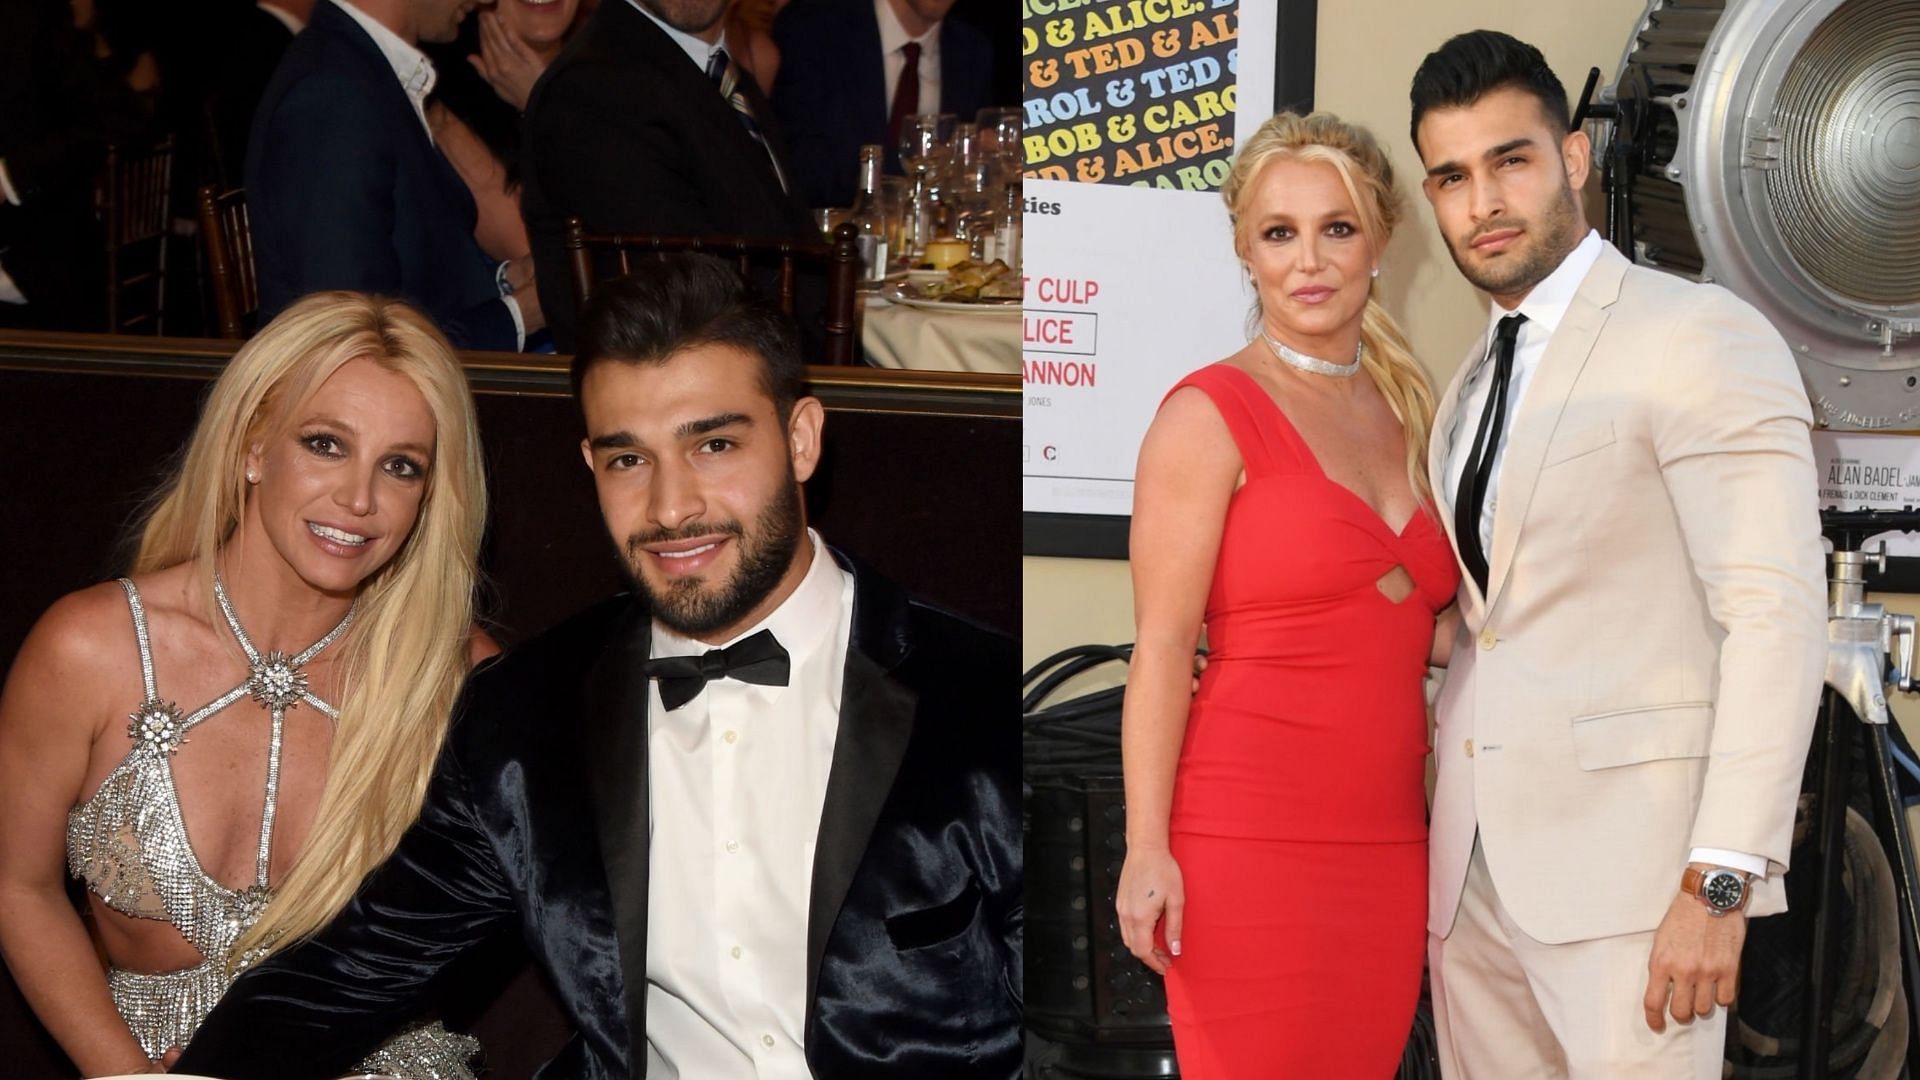 What is Royal Personal Training? Details explored after former gym member accused Sam Asghari of harassment, cheating on Britney Spears